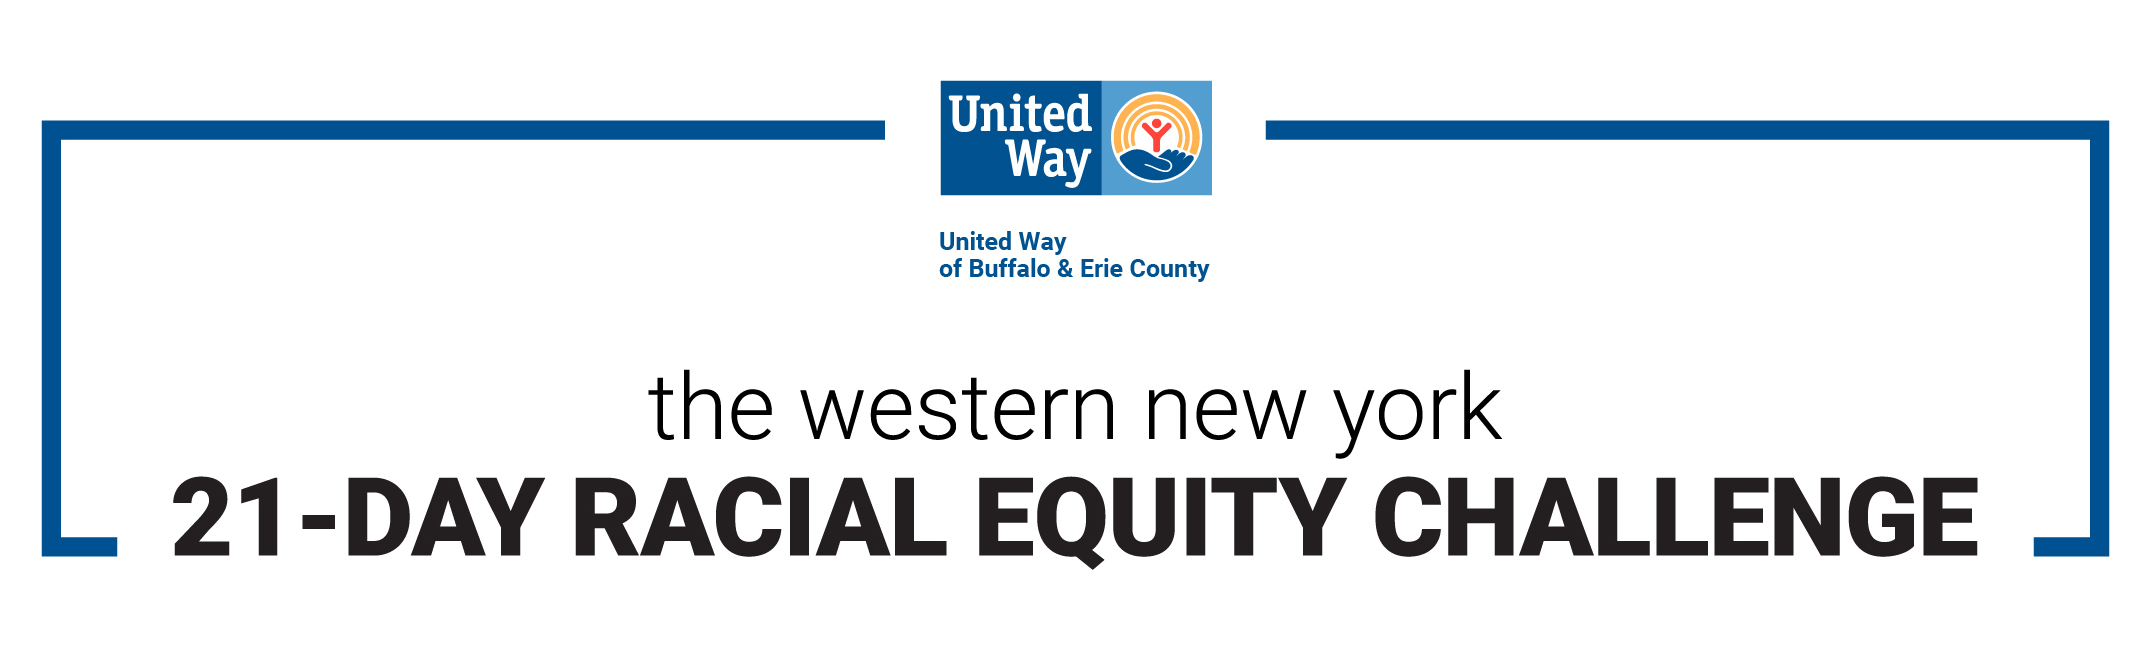 United Way Erie County Buffalo. The Western New York 21-Day Racial Equity Challenege